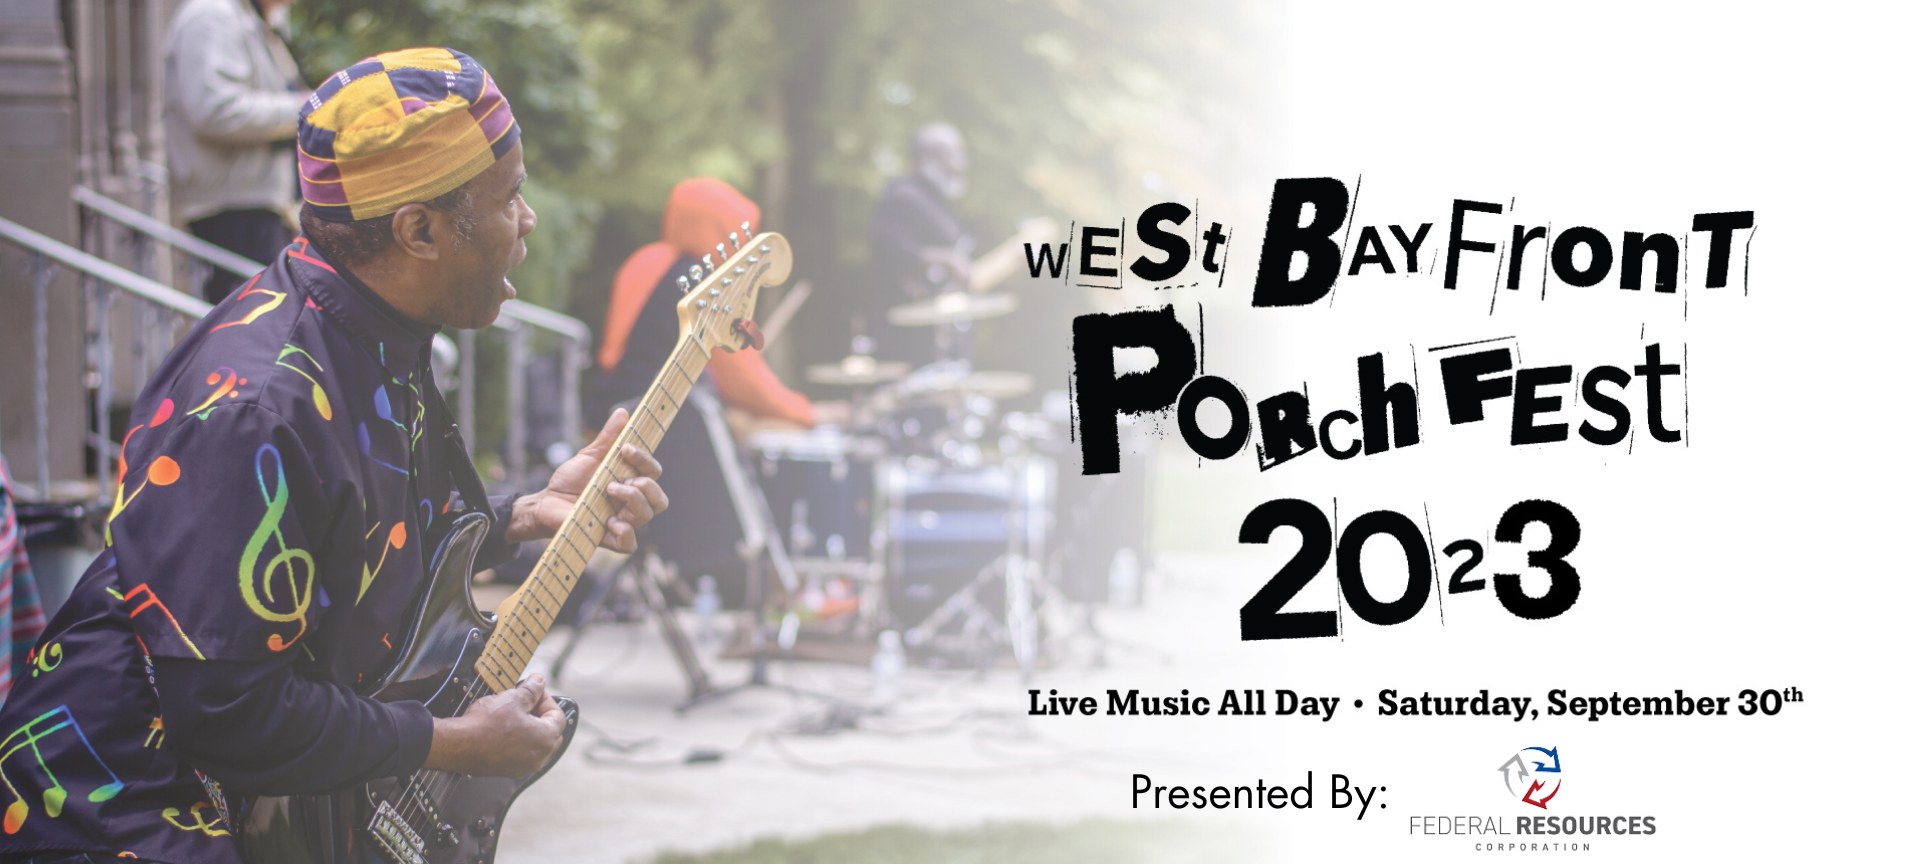 Our West Bayfront Porchfest 2023